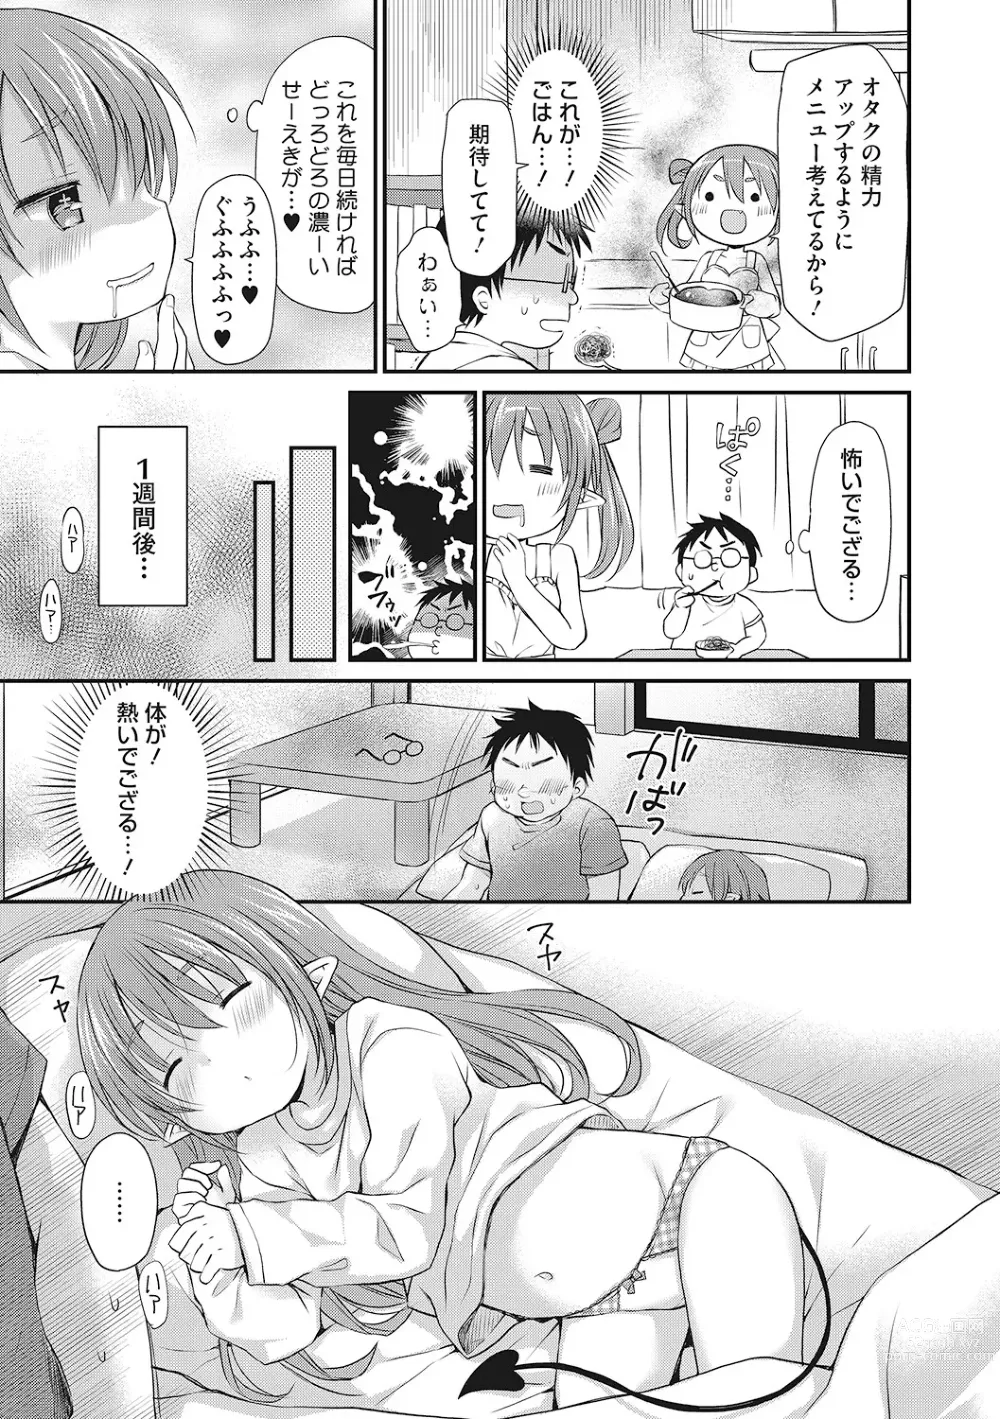 Page 20 of manga LQ -Little Queen- Vol. 53